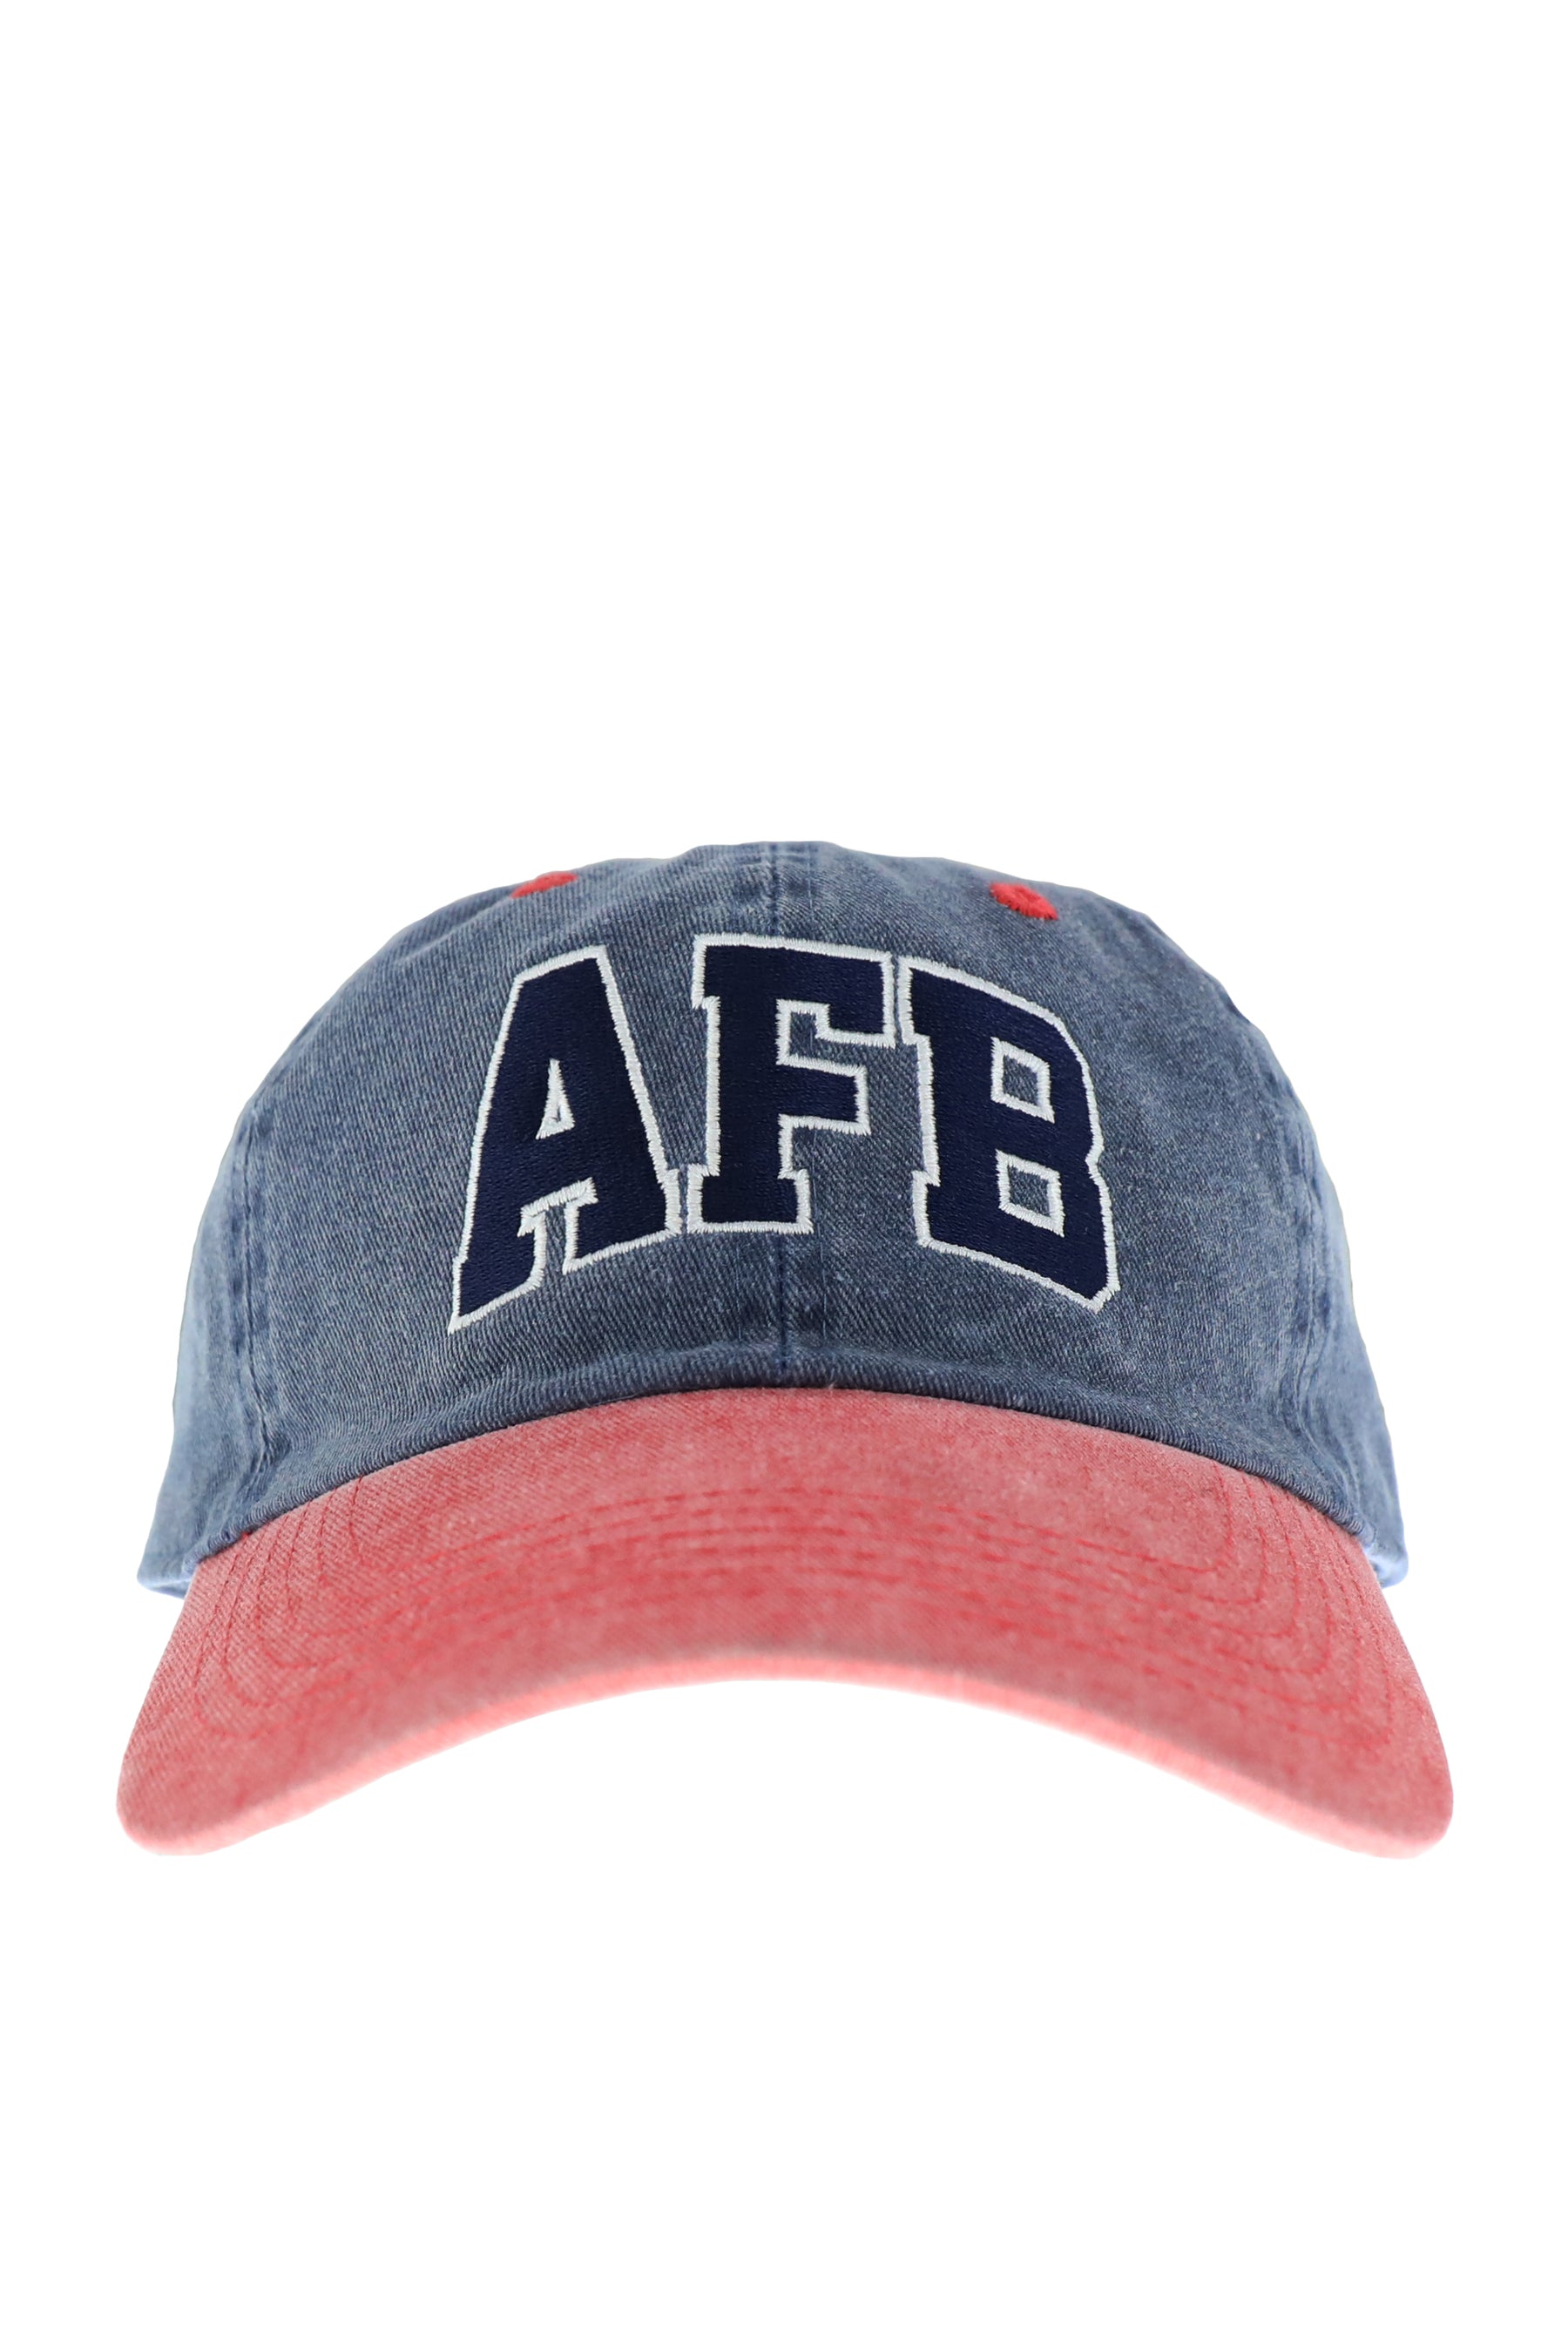 AFB SS23 CLASSIC LOGO / CAP -NUBIAN / NVY RED